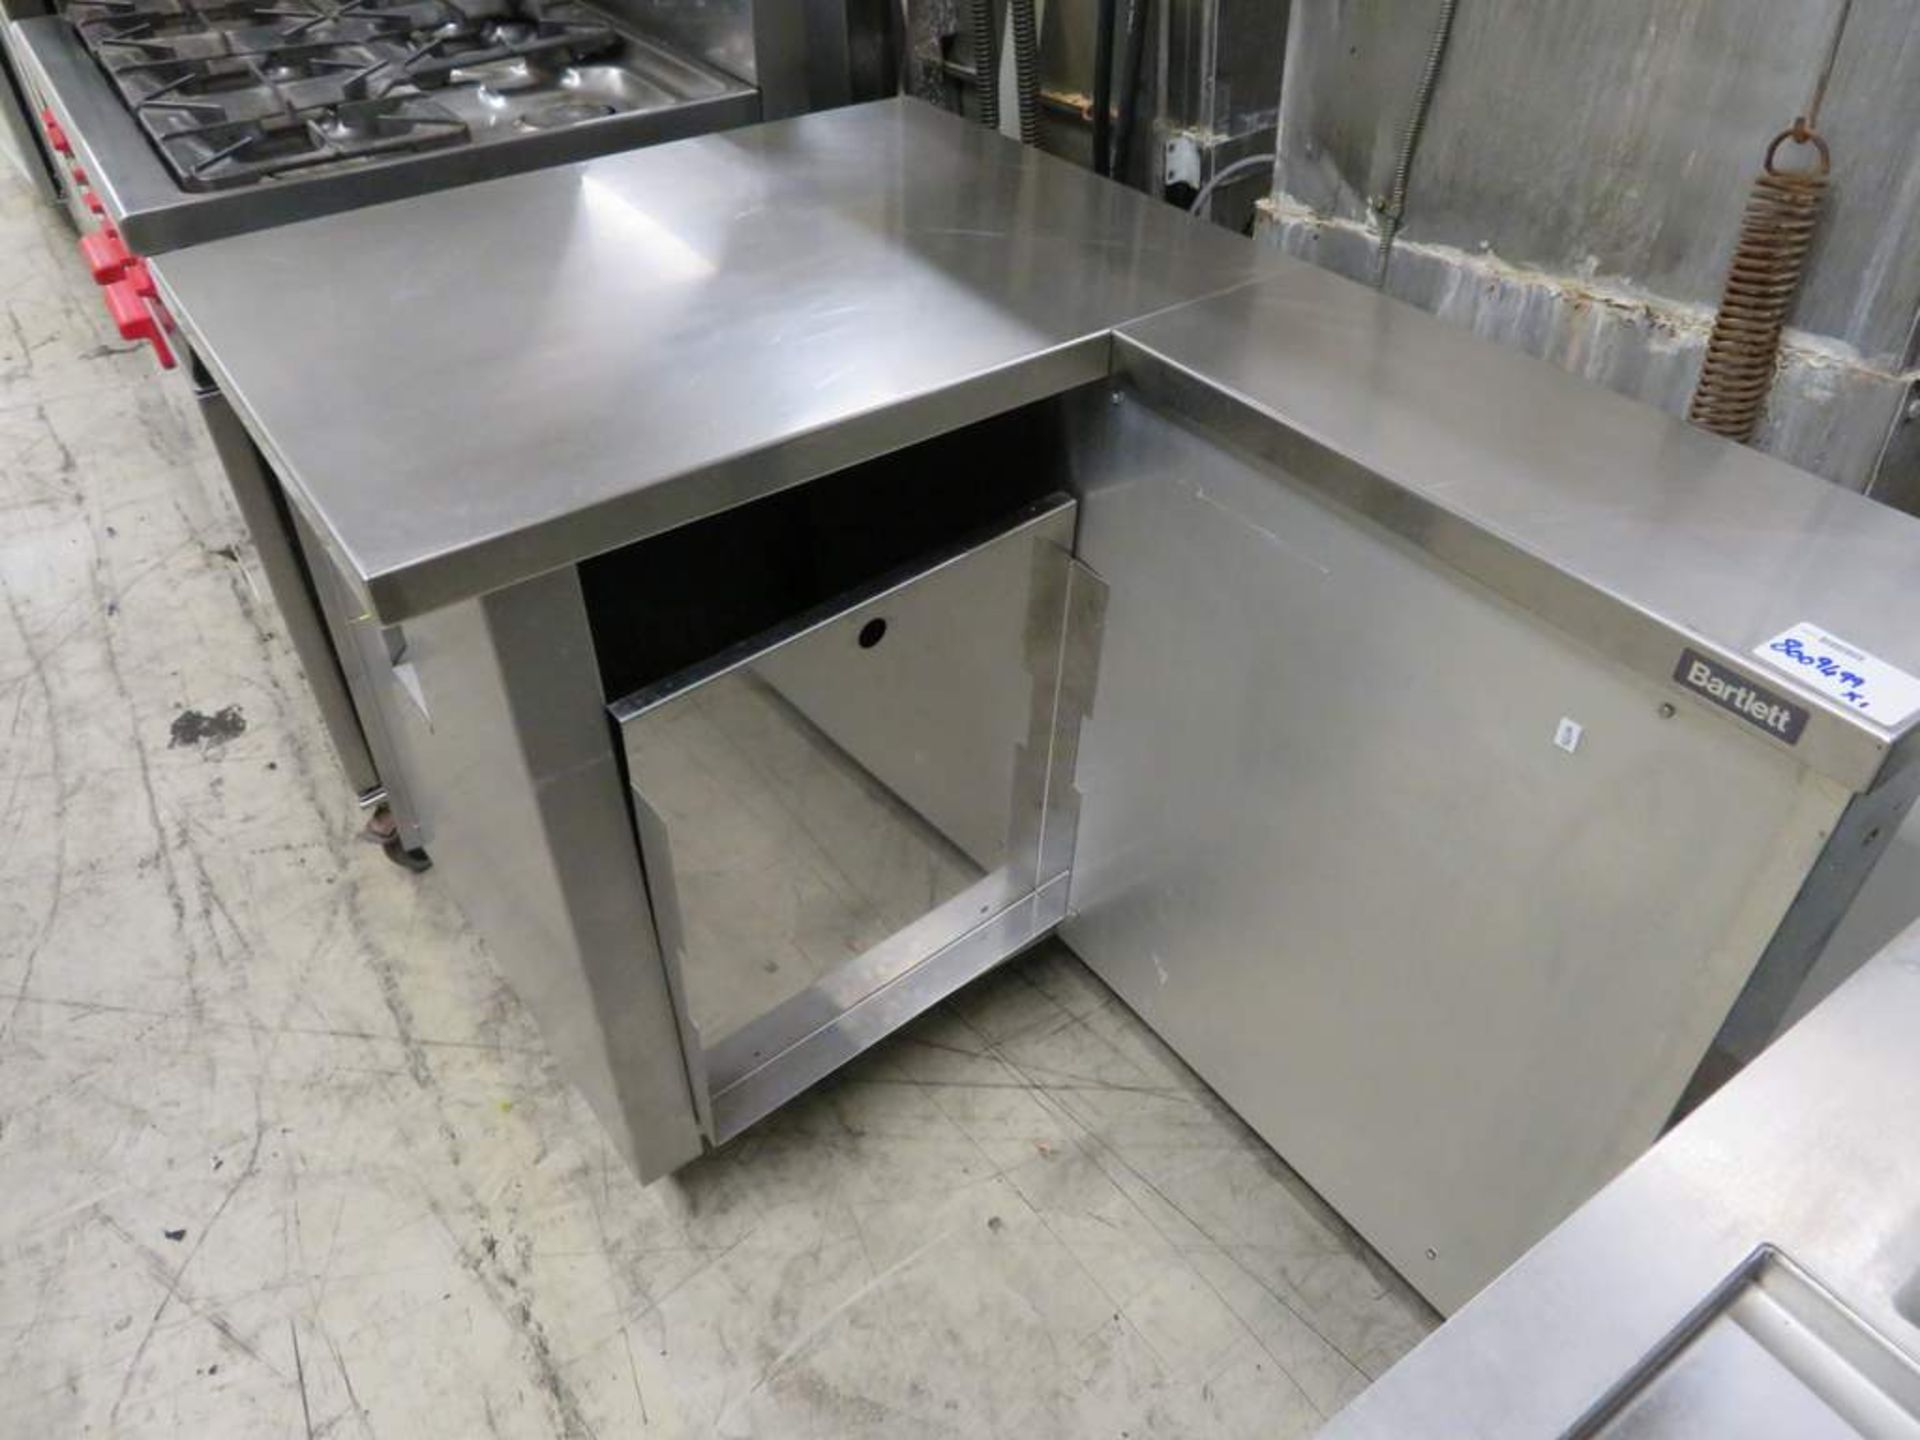 Bartlett stainless steel L shaped preperation table - Image 3 of 6